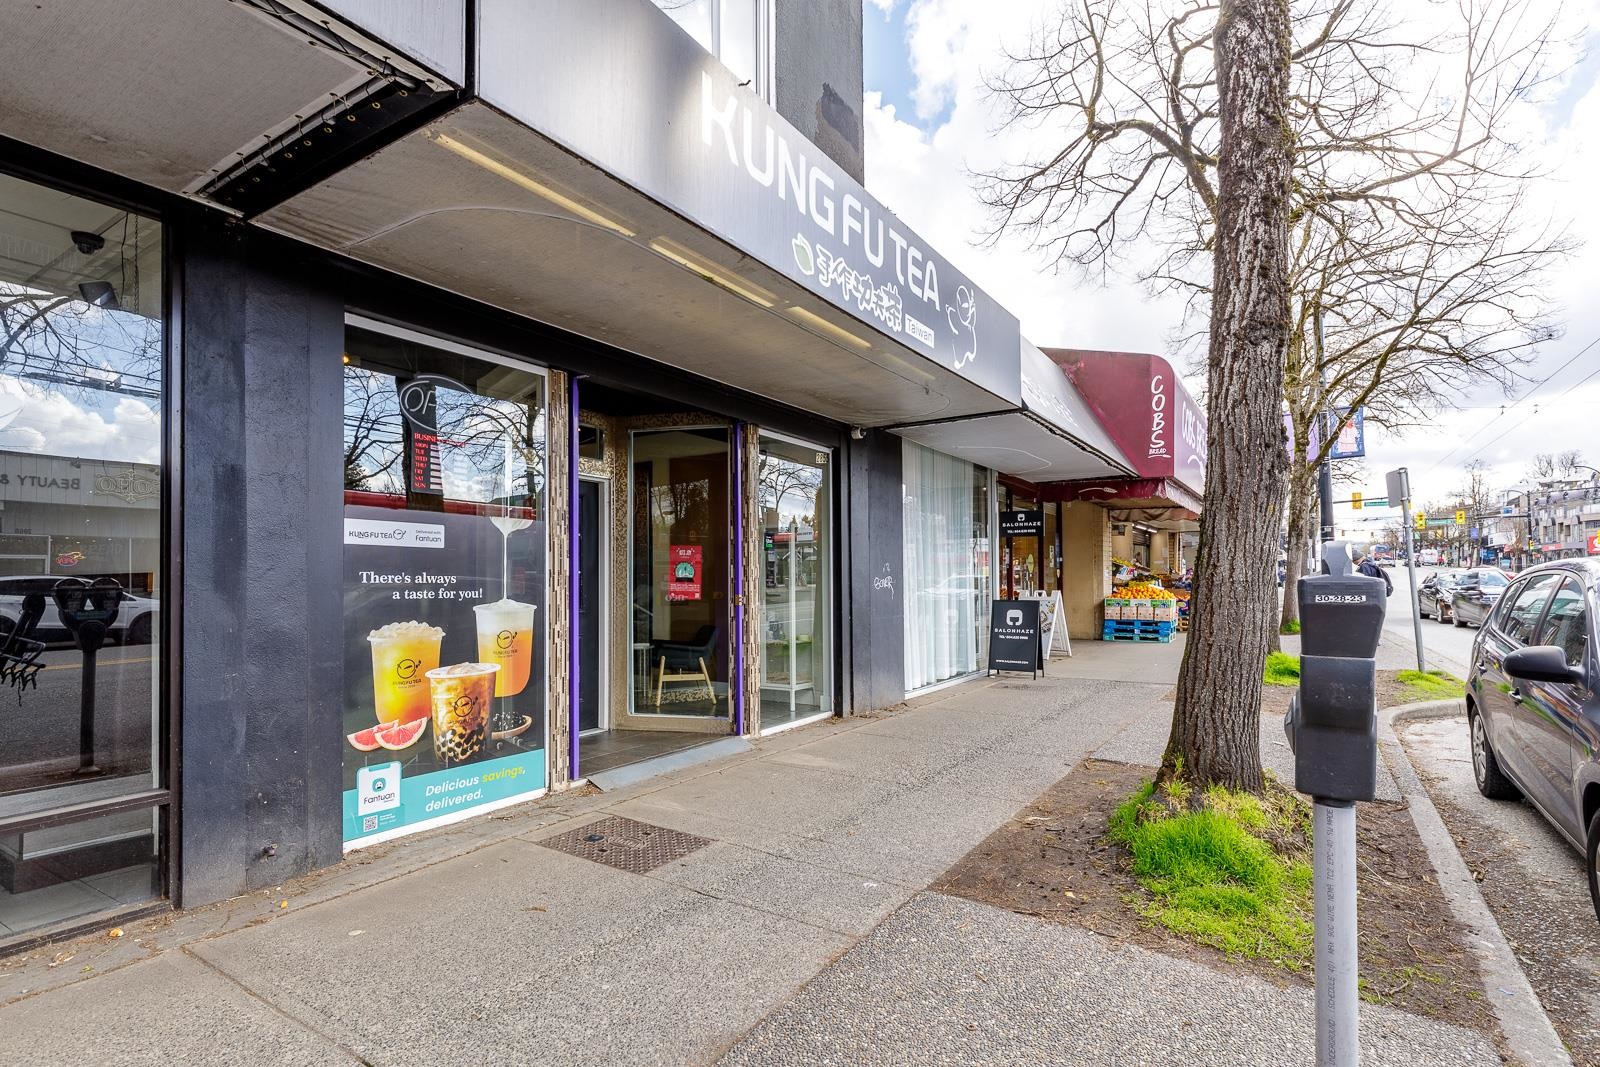 Wilson Lam Realtor, 2855 BROADWAY STREET, Vancouver, British Columbia V6K 2G6, Business,For Lease ,C8050672